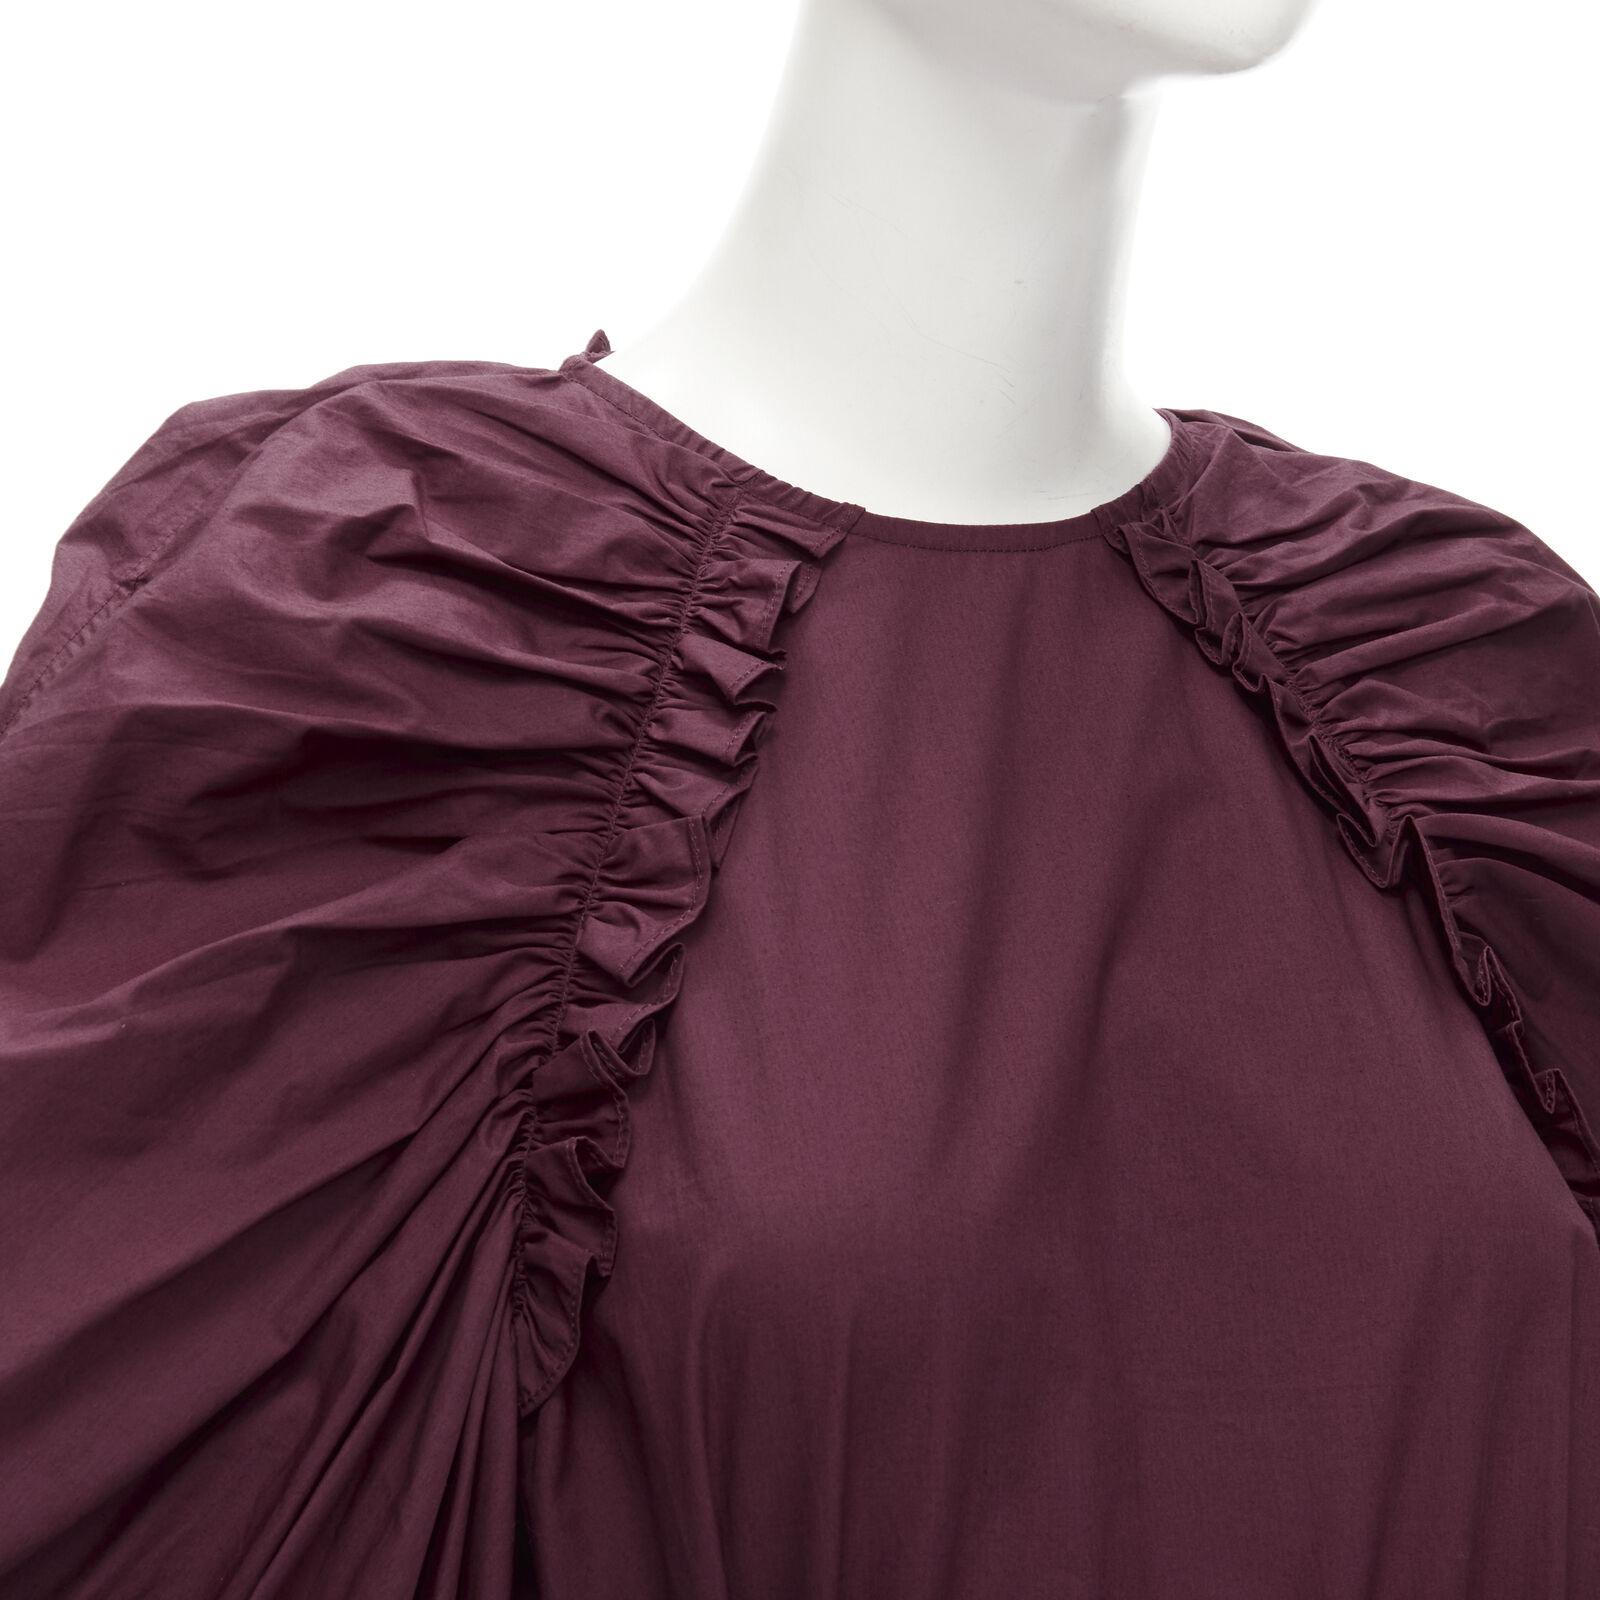 ULLA JOHNSON burgundy cotton bow belt balloon sleeves flared midi dress US2 XS
Reference: AAWC/A00187
Brand: Ulla Johnson
Material: Cotton
Color: Burgundy
Pattern: Solid
Closure: Zip

CONDITION:
Condition: Excellent, this item was pre-owned and is